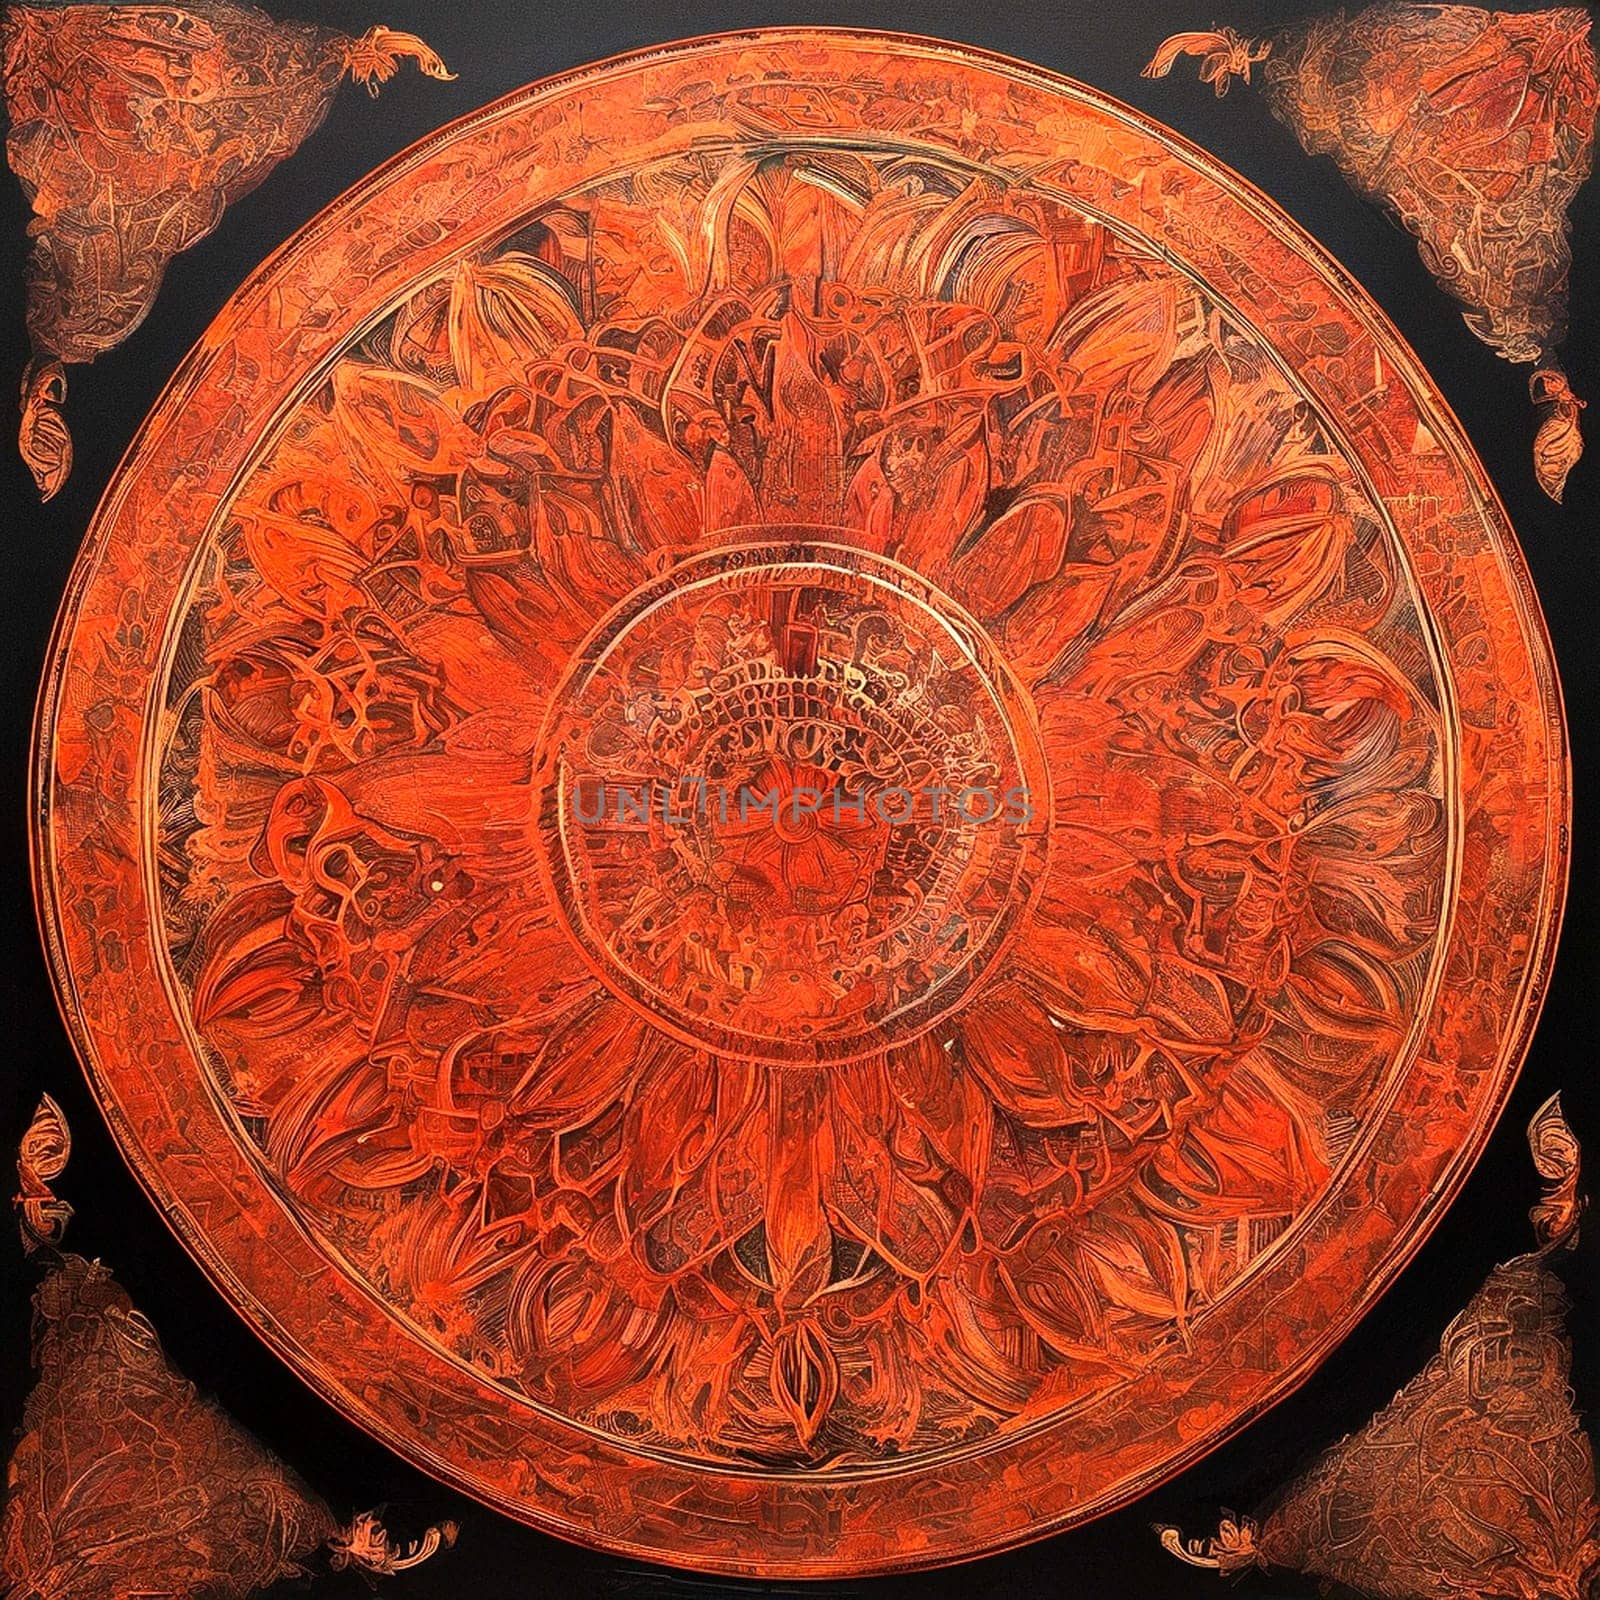 Fiery Mandala in red and orange. by Vailatese46